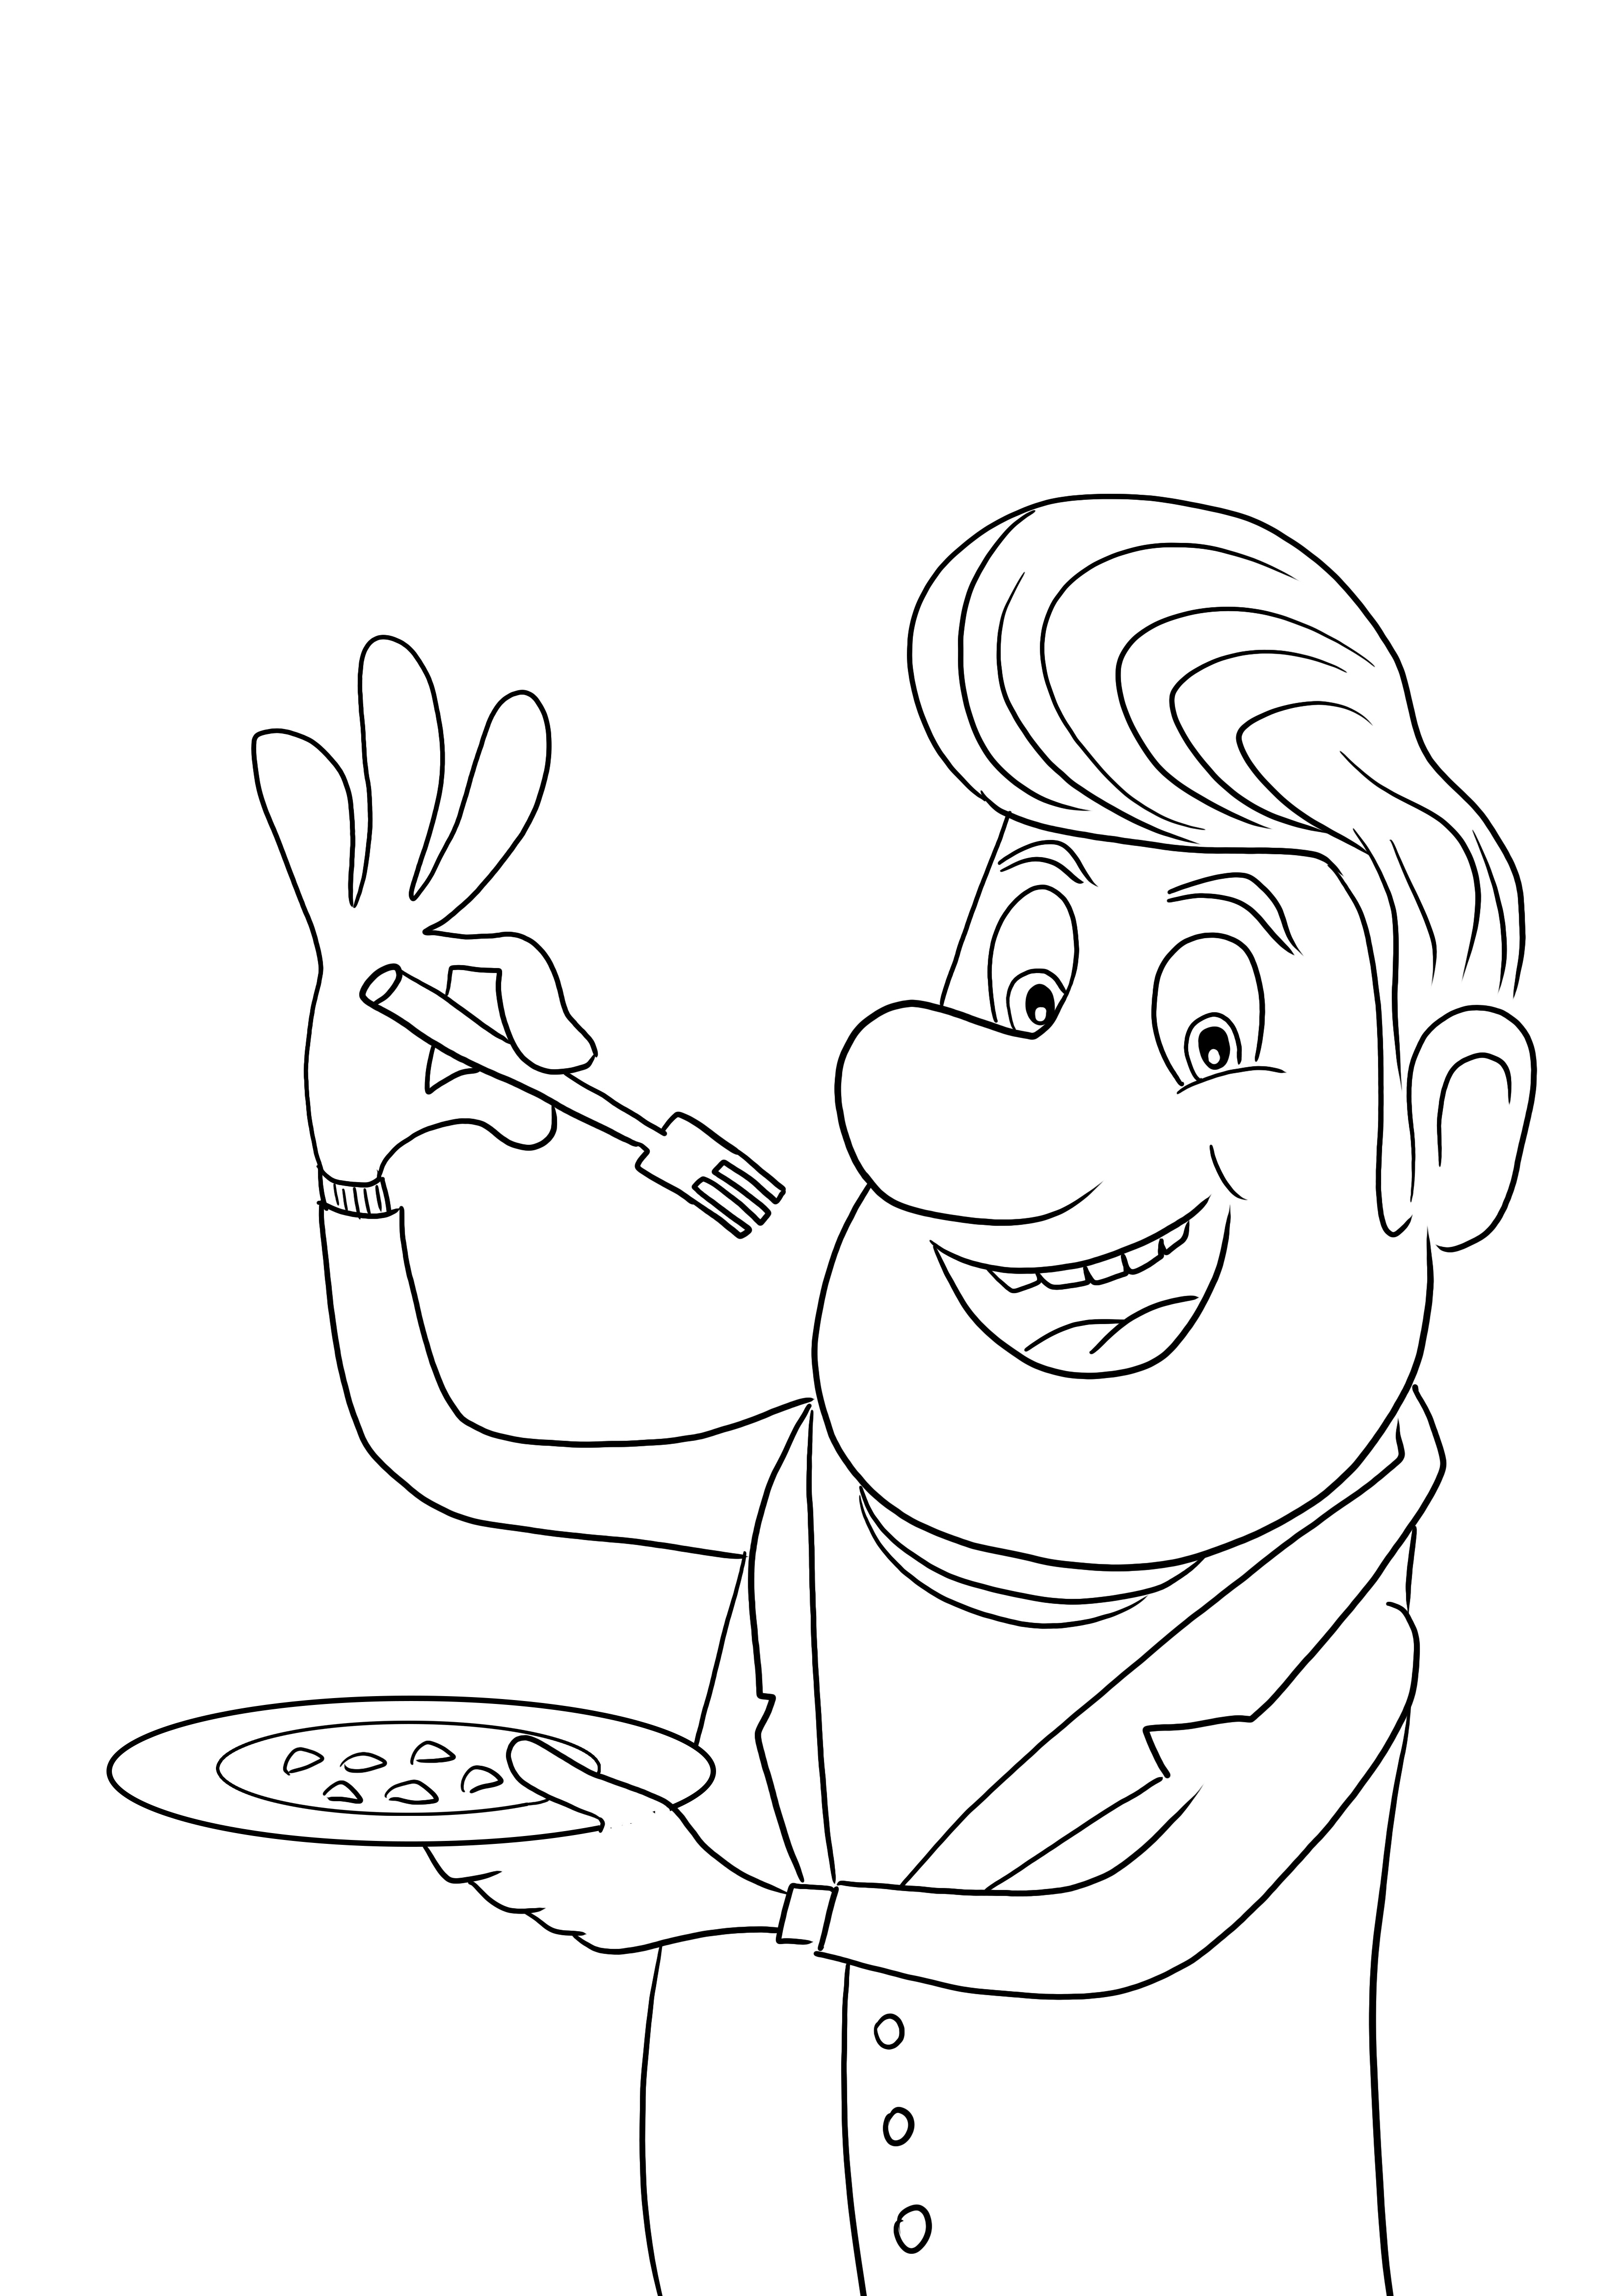 Mayor Shelbourne eating his snack easy to color image and free to download